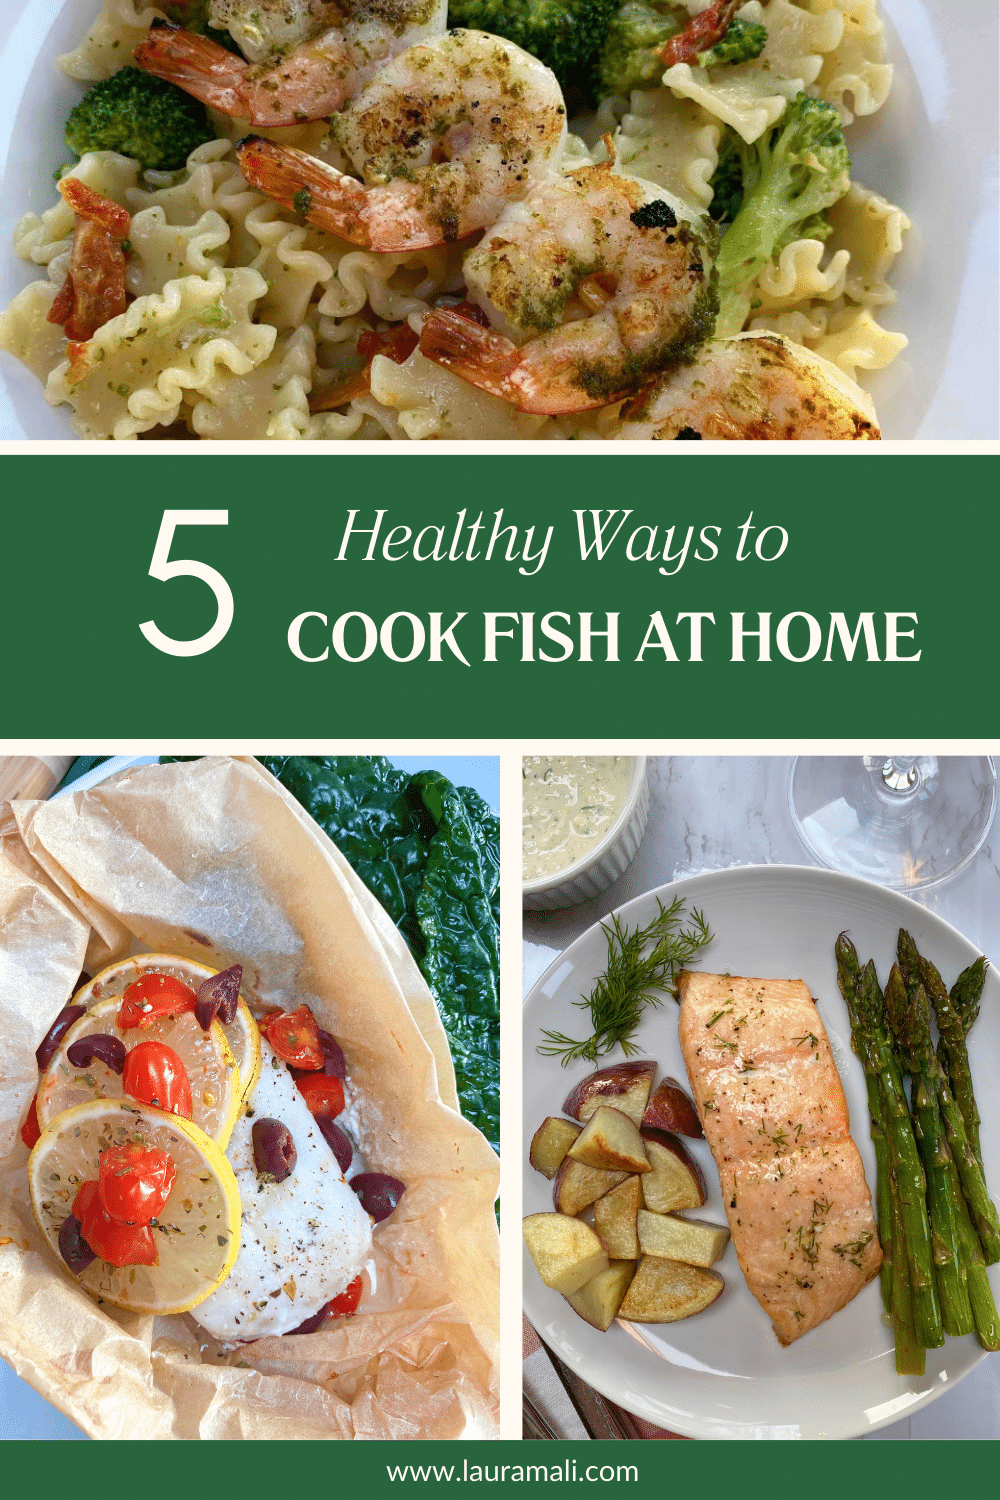 3 images of different types of seafood prepared at home with a green overlay graphic that says 5 healthy ways to cook fish at home.